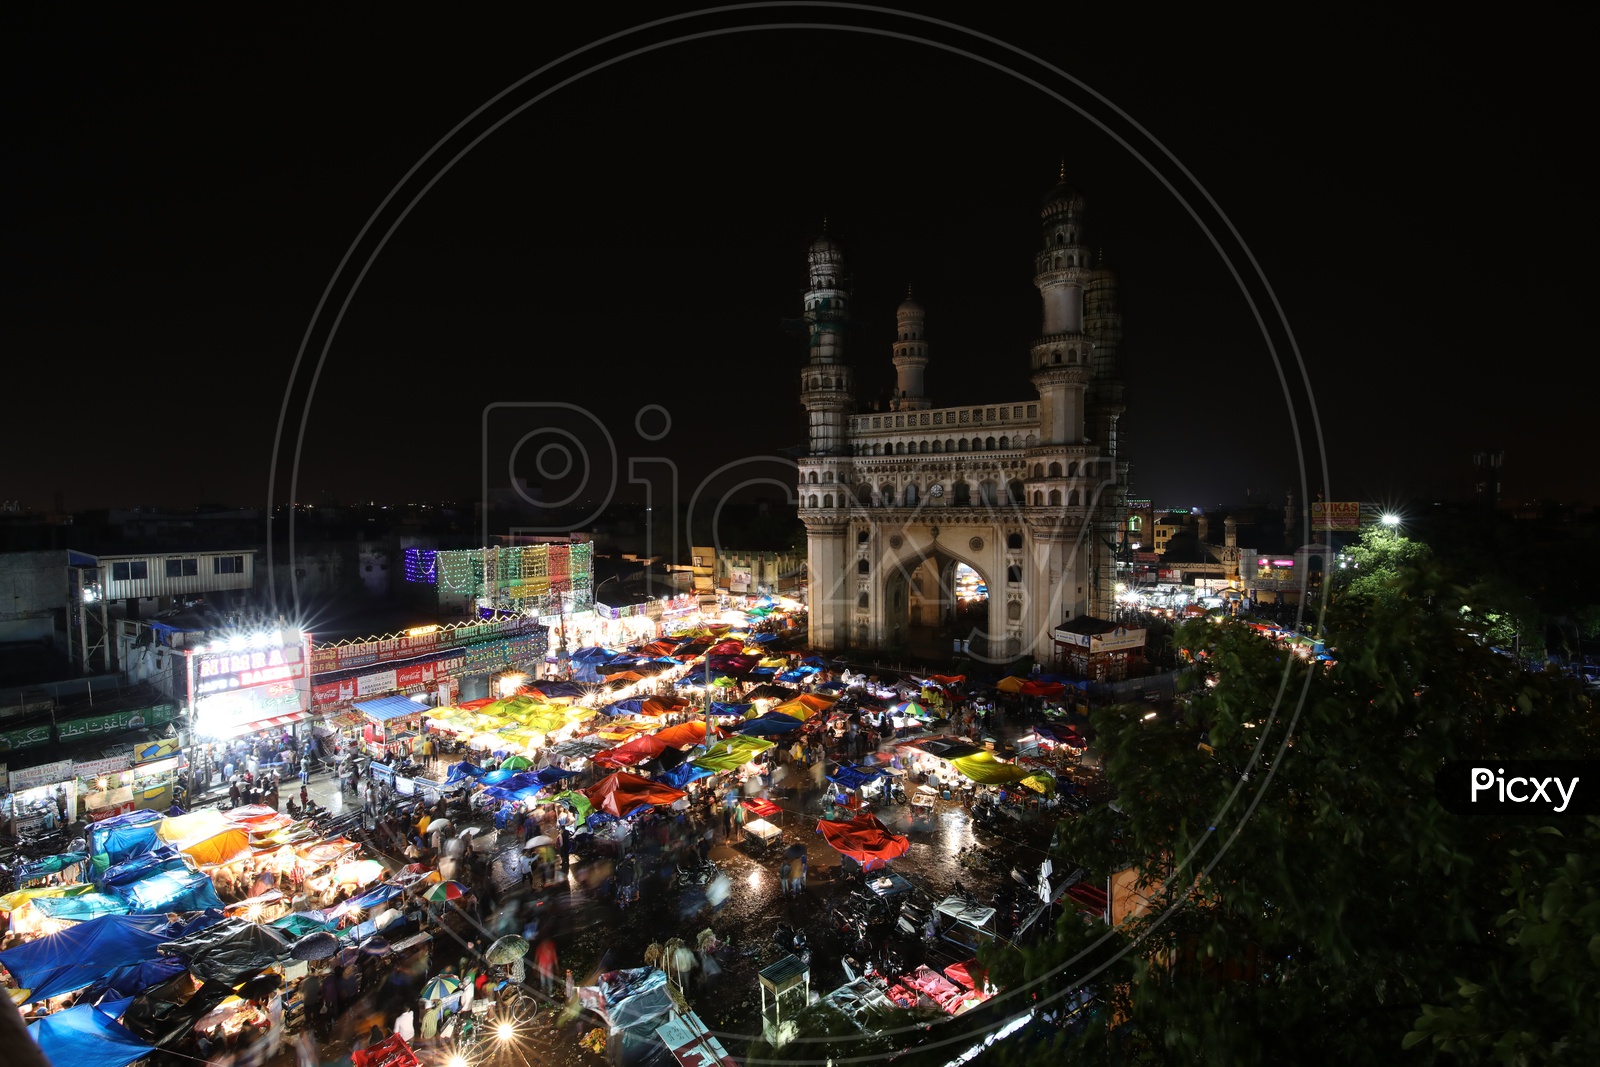 A Beautiful Aerial shot Of Charminar and The Vendor Stalls Around The Streets Of Charminar